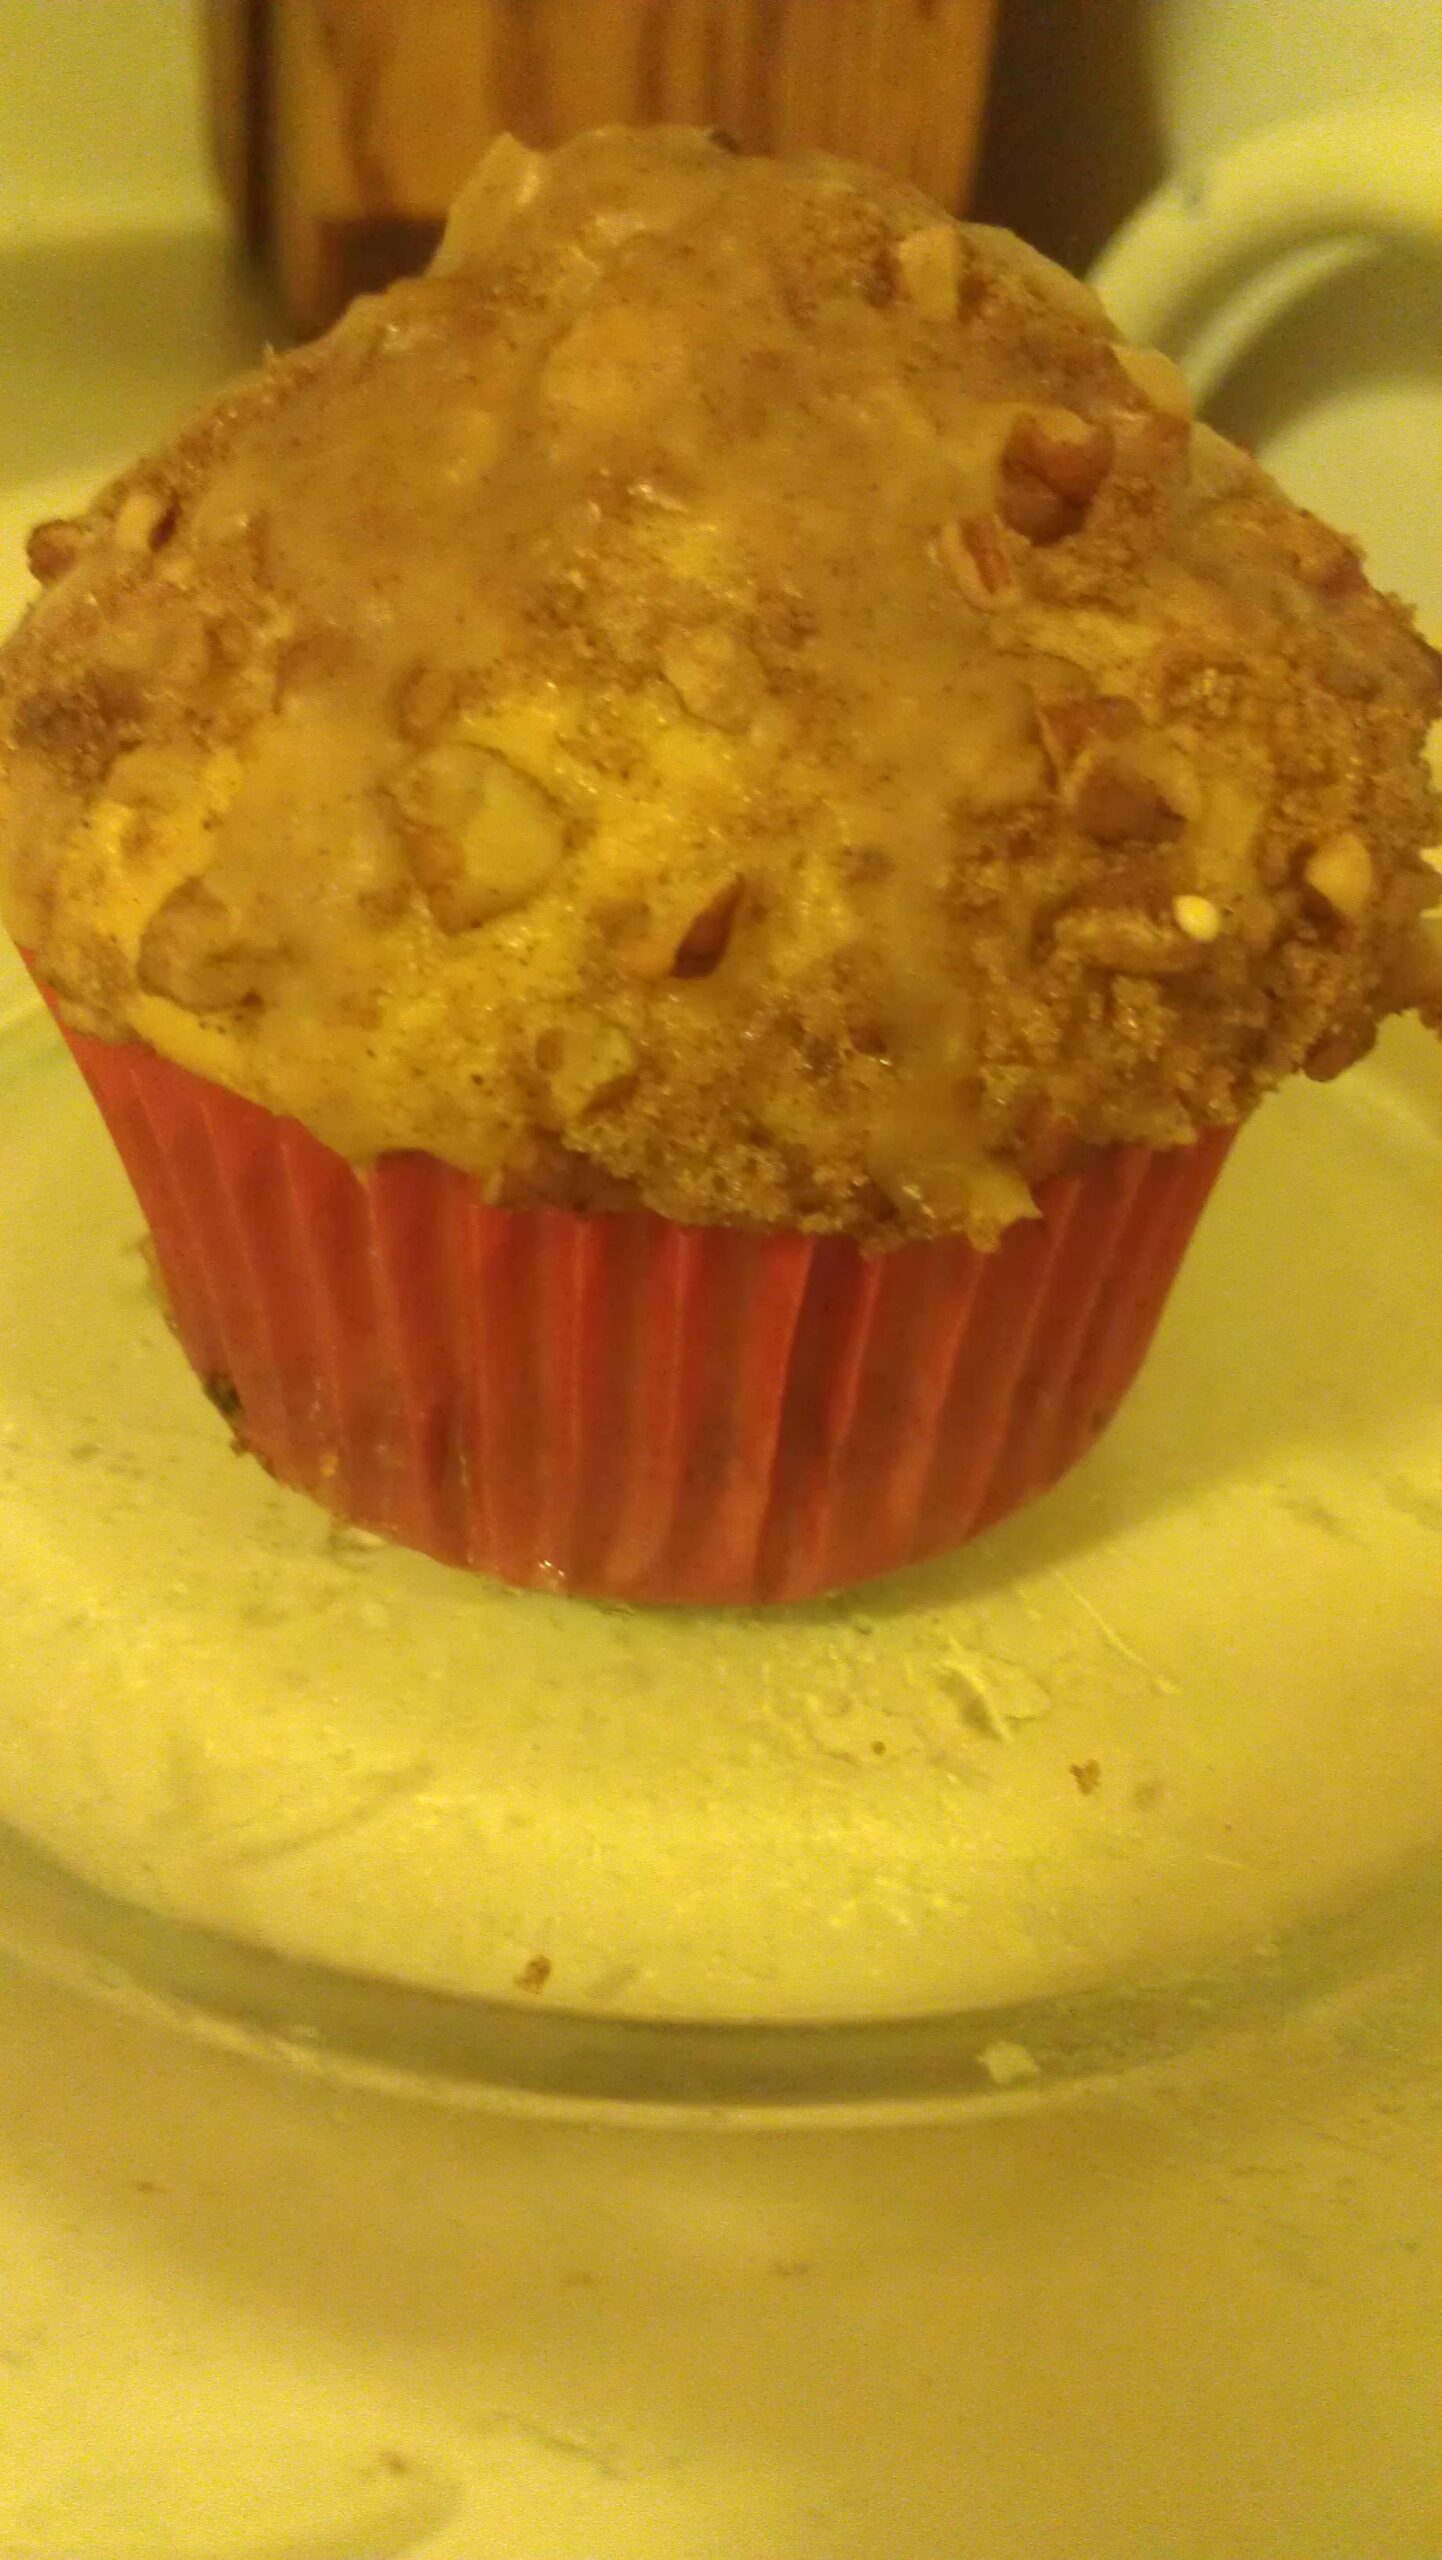  The perfect breakfast companion: cinnamon coffee cake muffins and a hot cup of coffee.